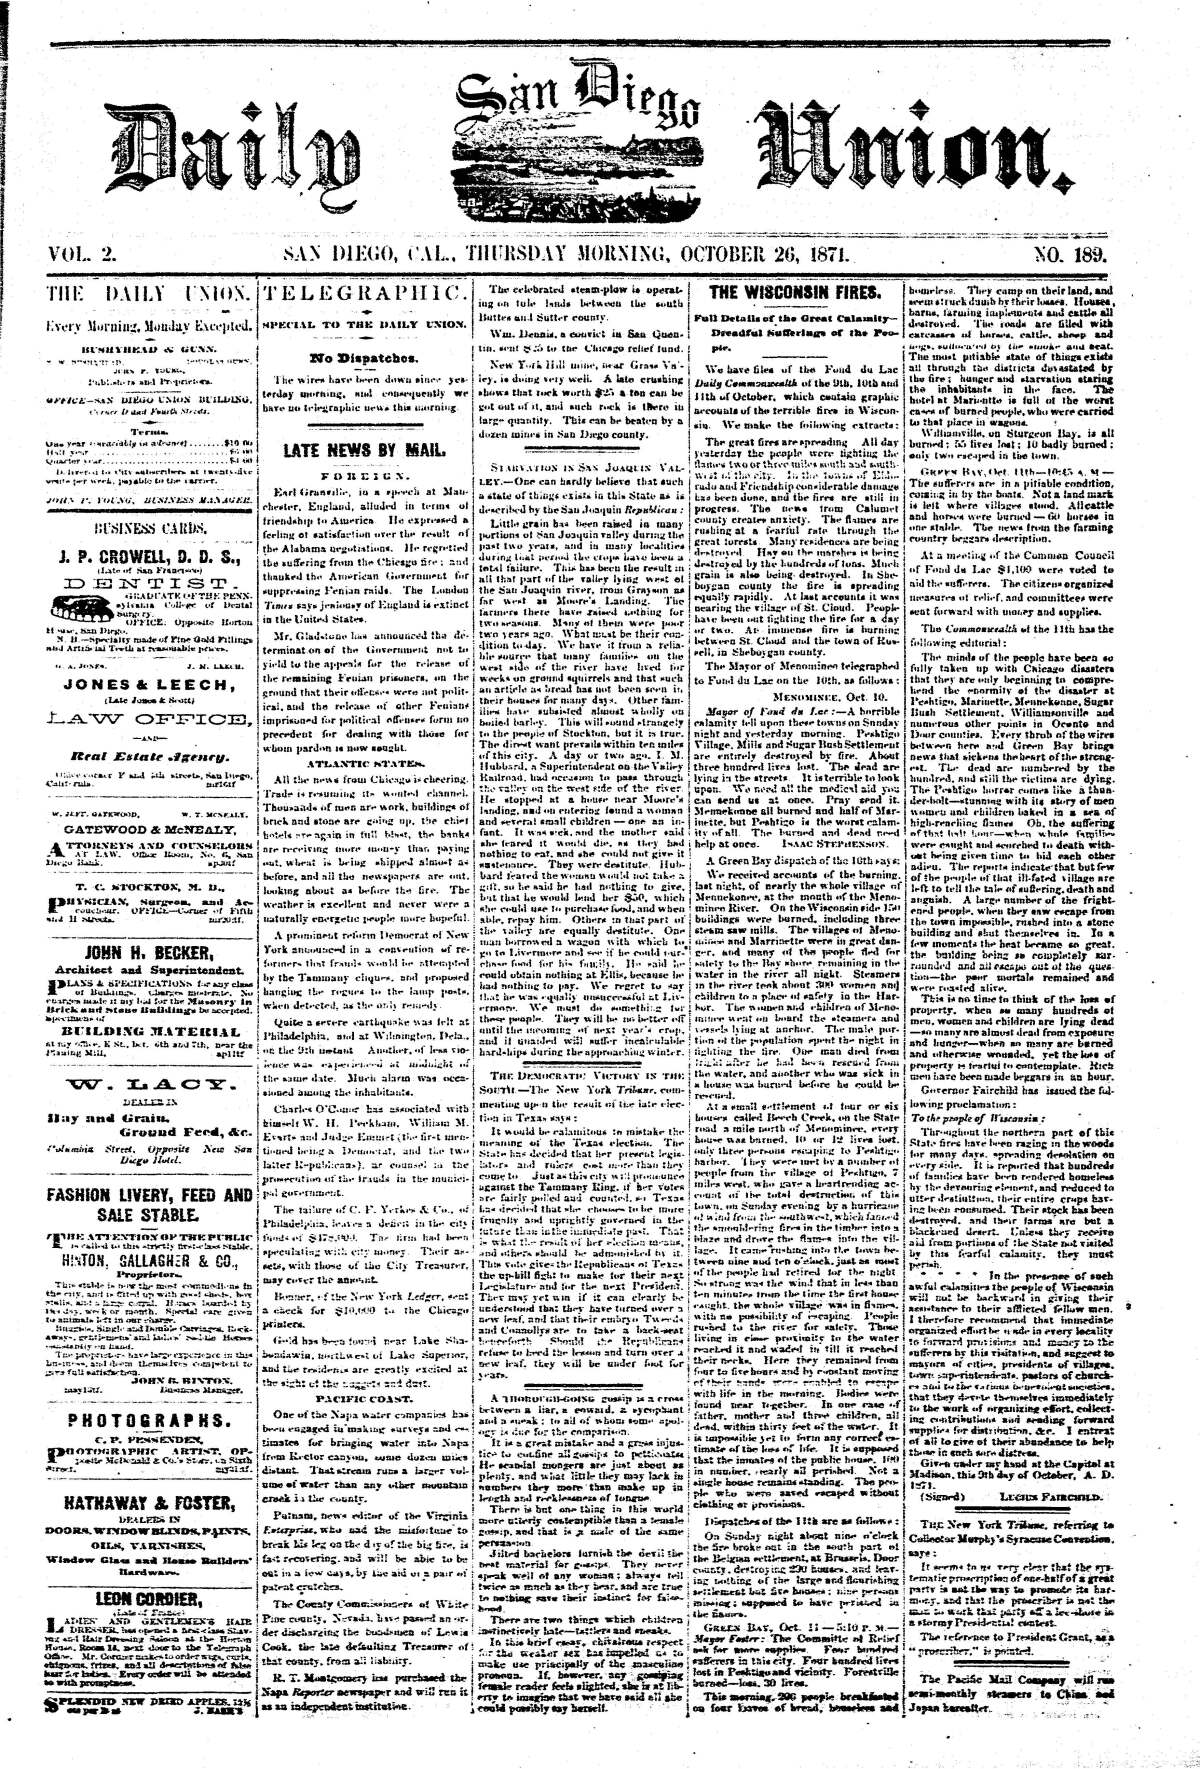 Front page of the Daily San Diego Union, Oct. 27, 1871.